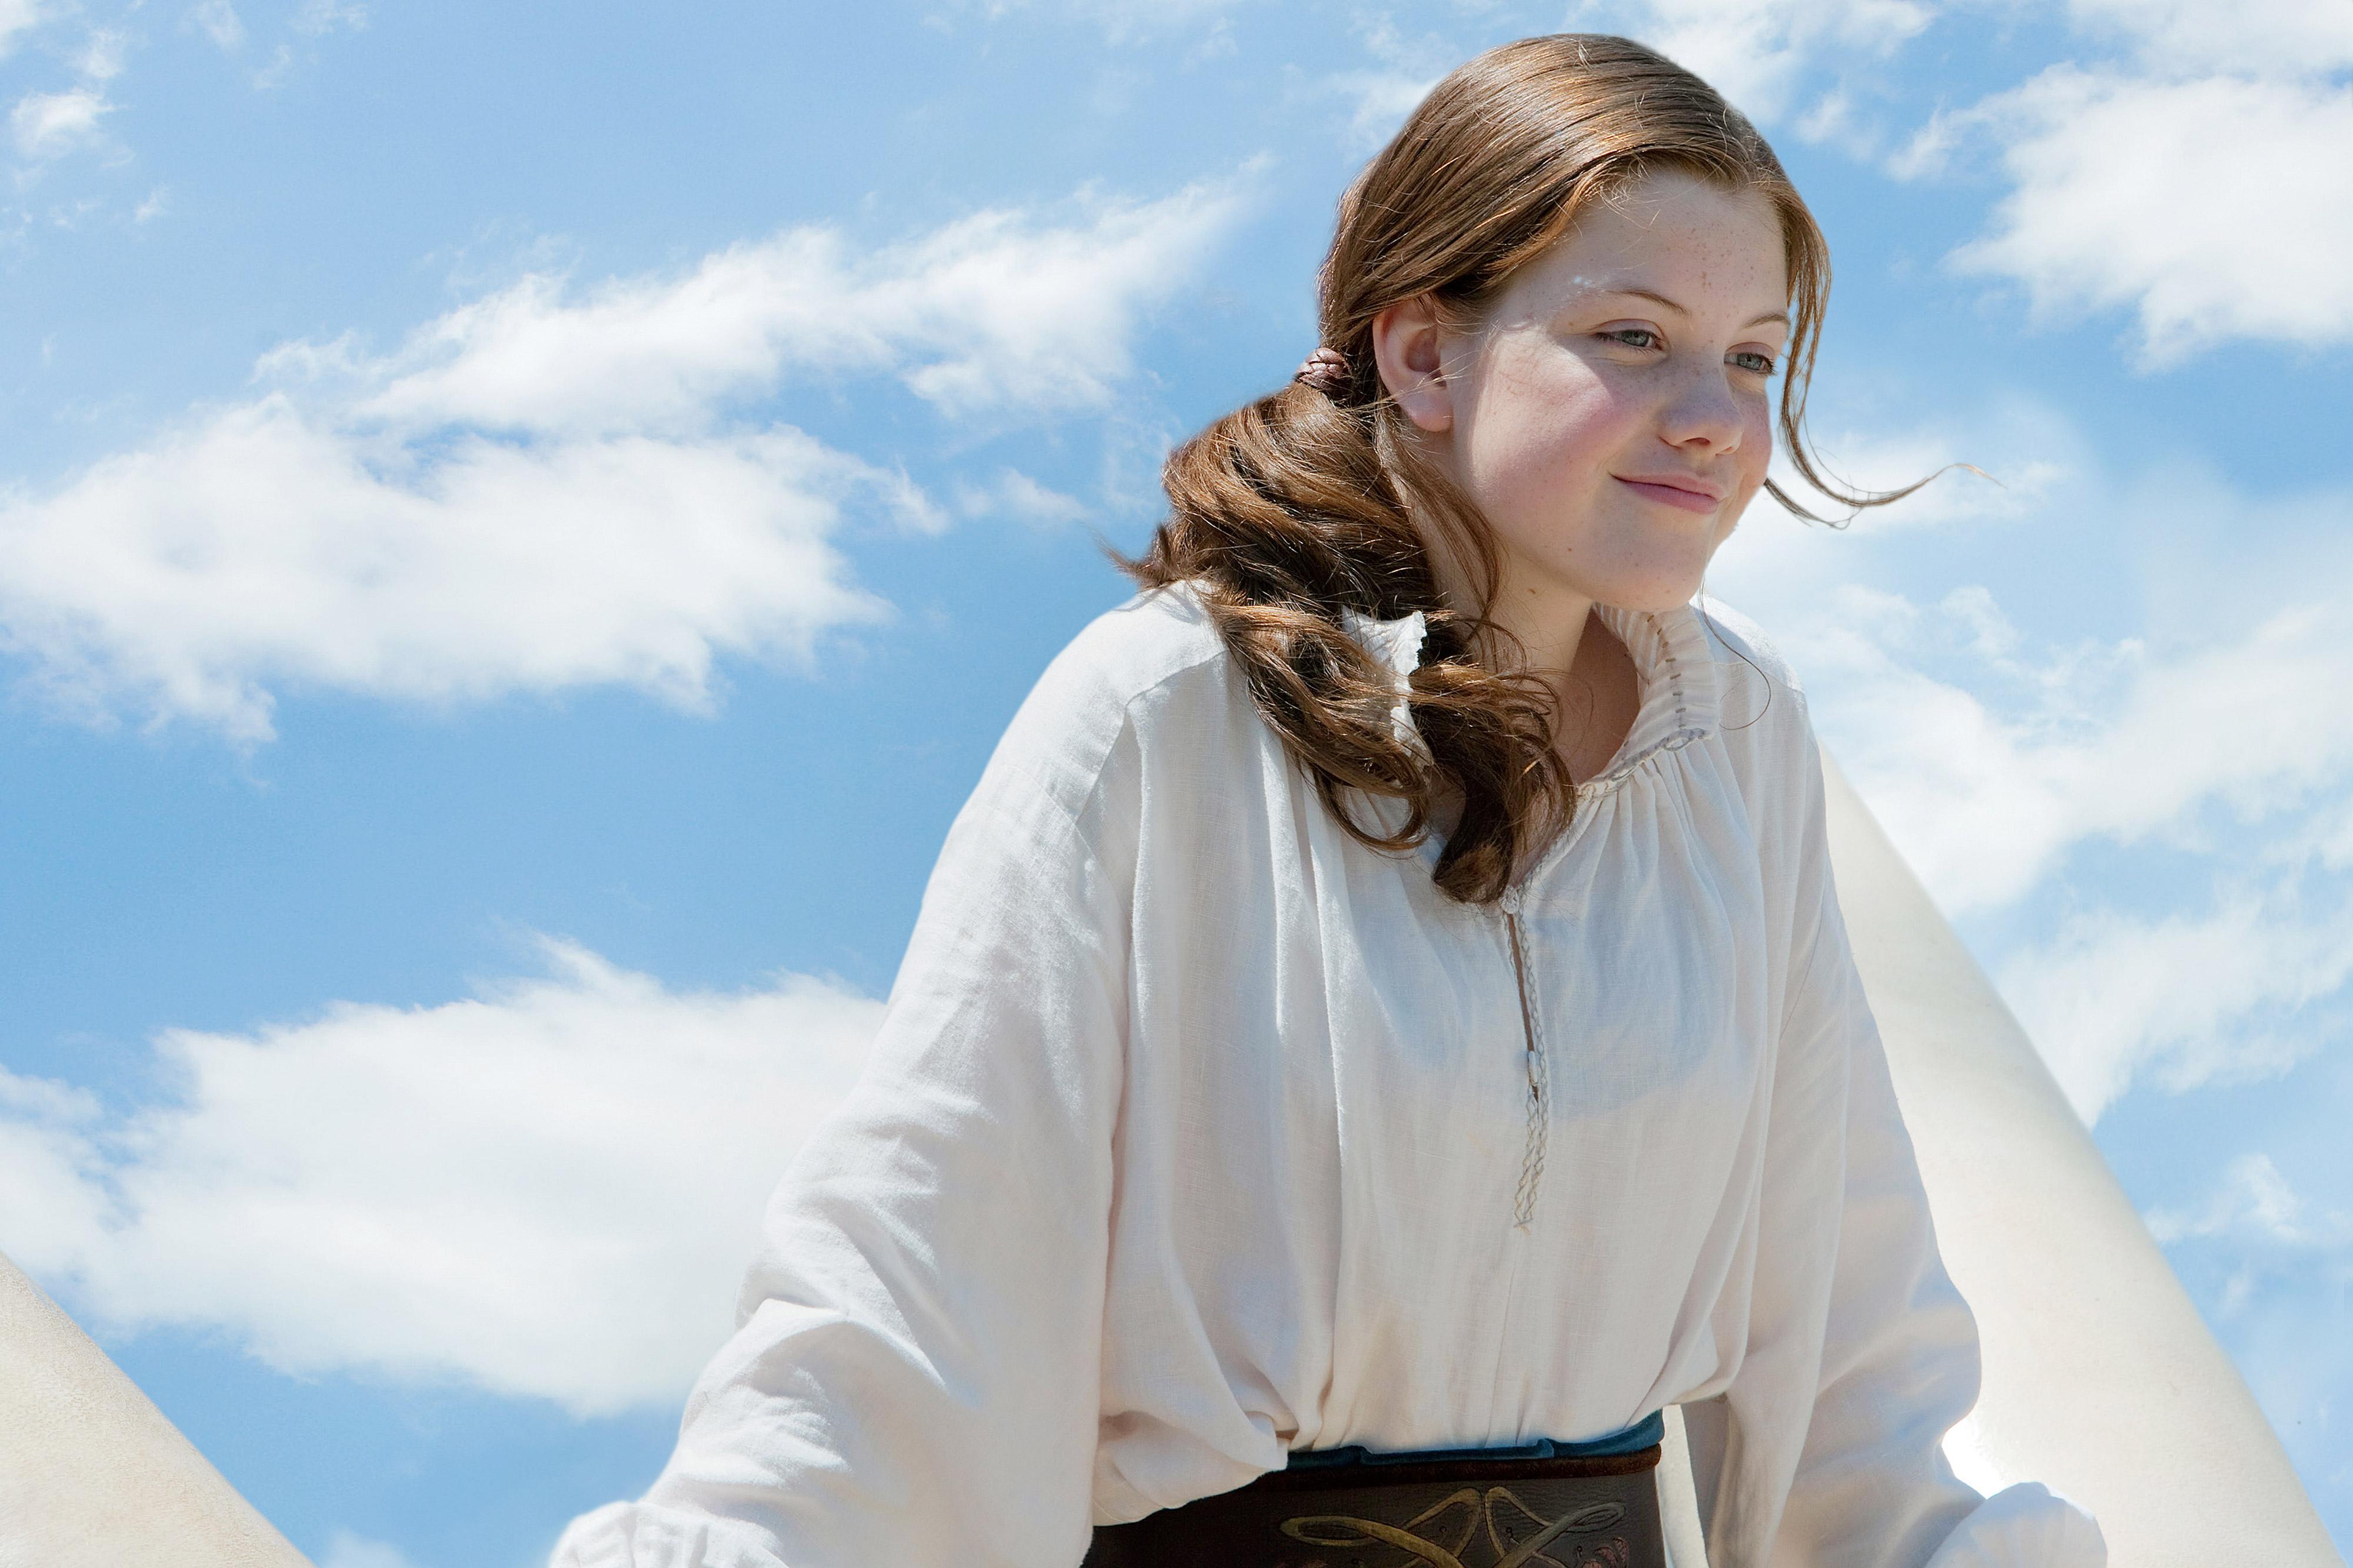 Georgie Henley is playing lucy. She is looking over the side of the Dawn Treader with a partially cloudy blue sky in the background.